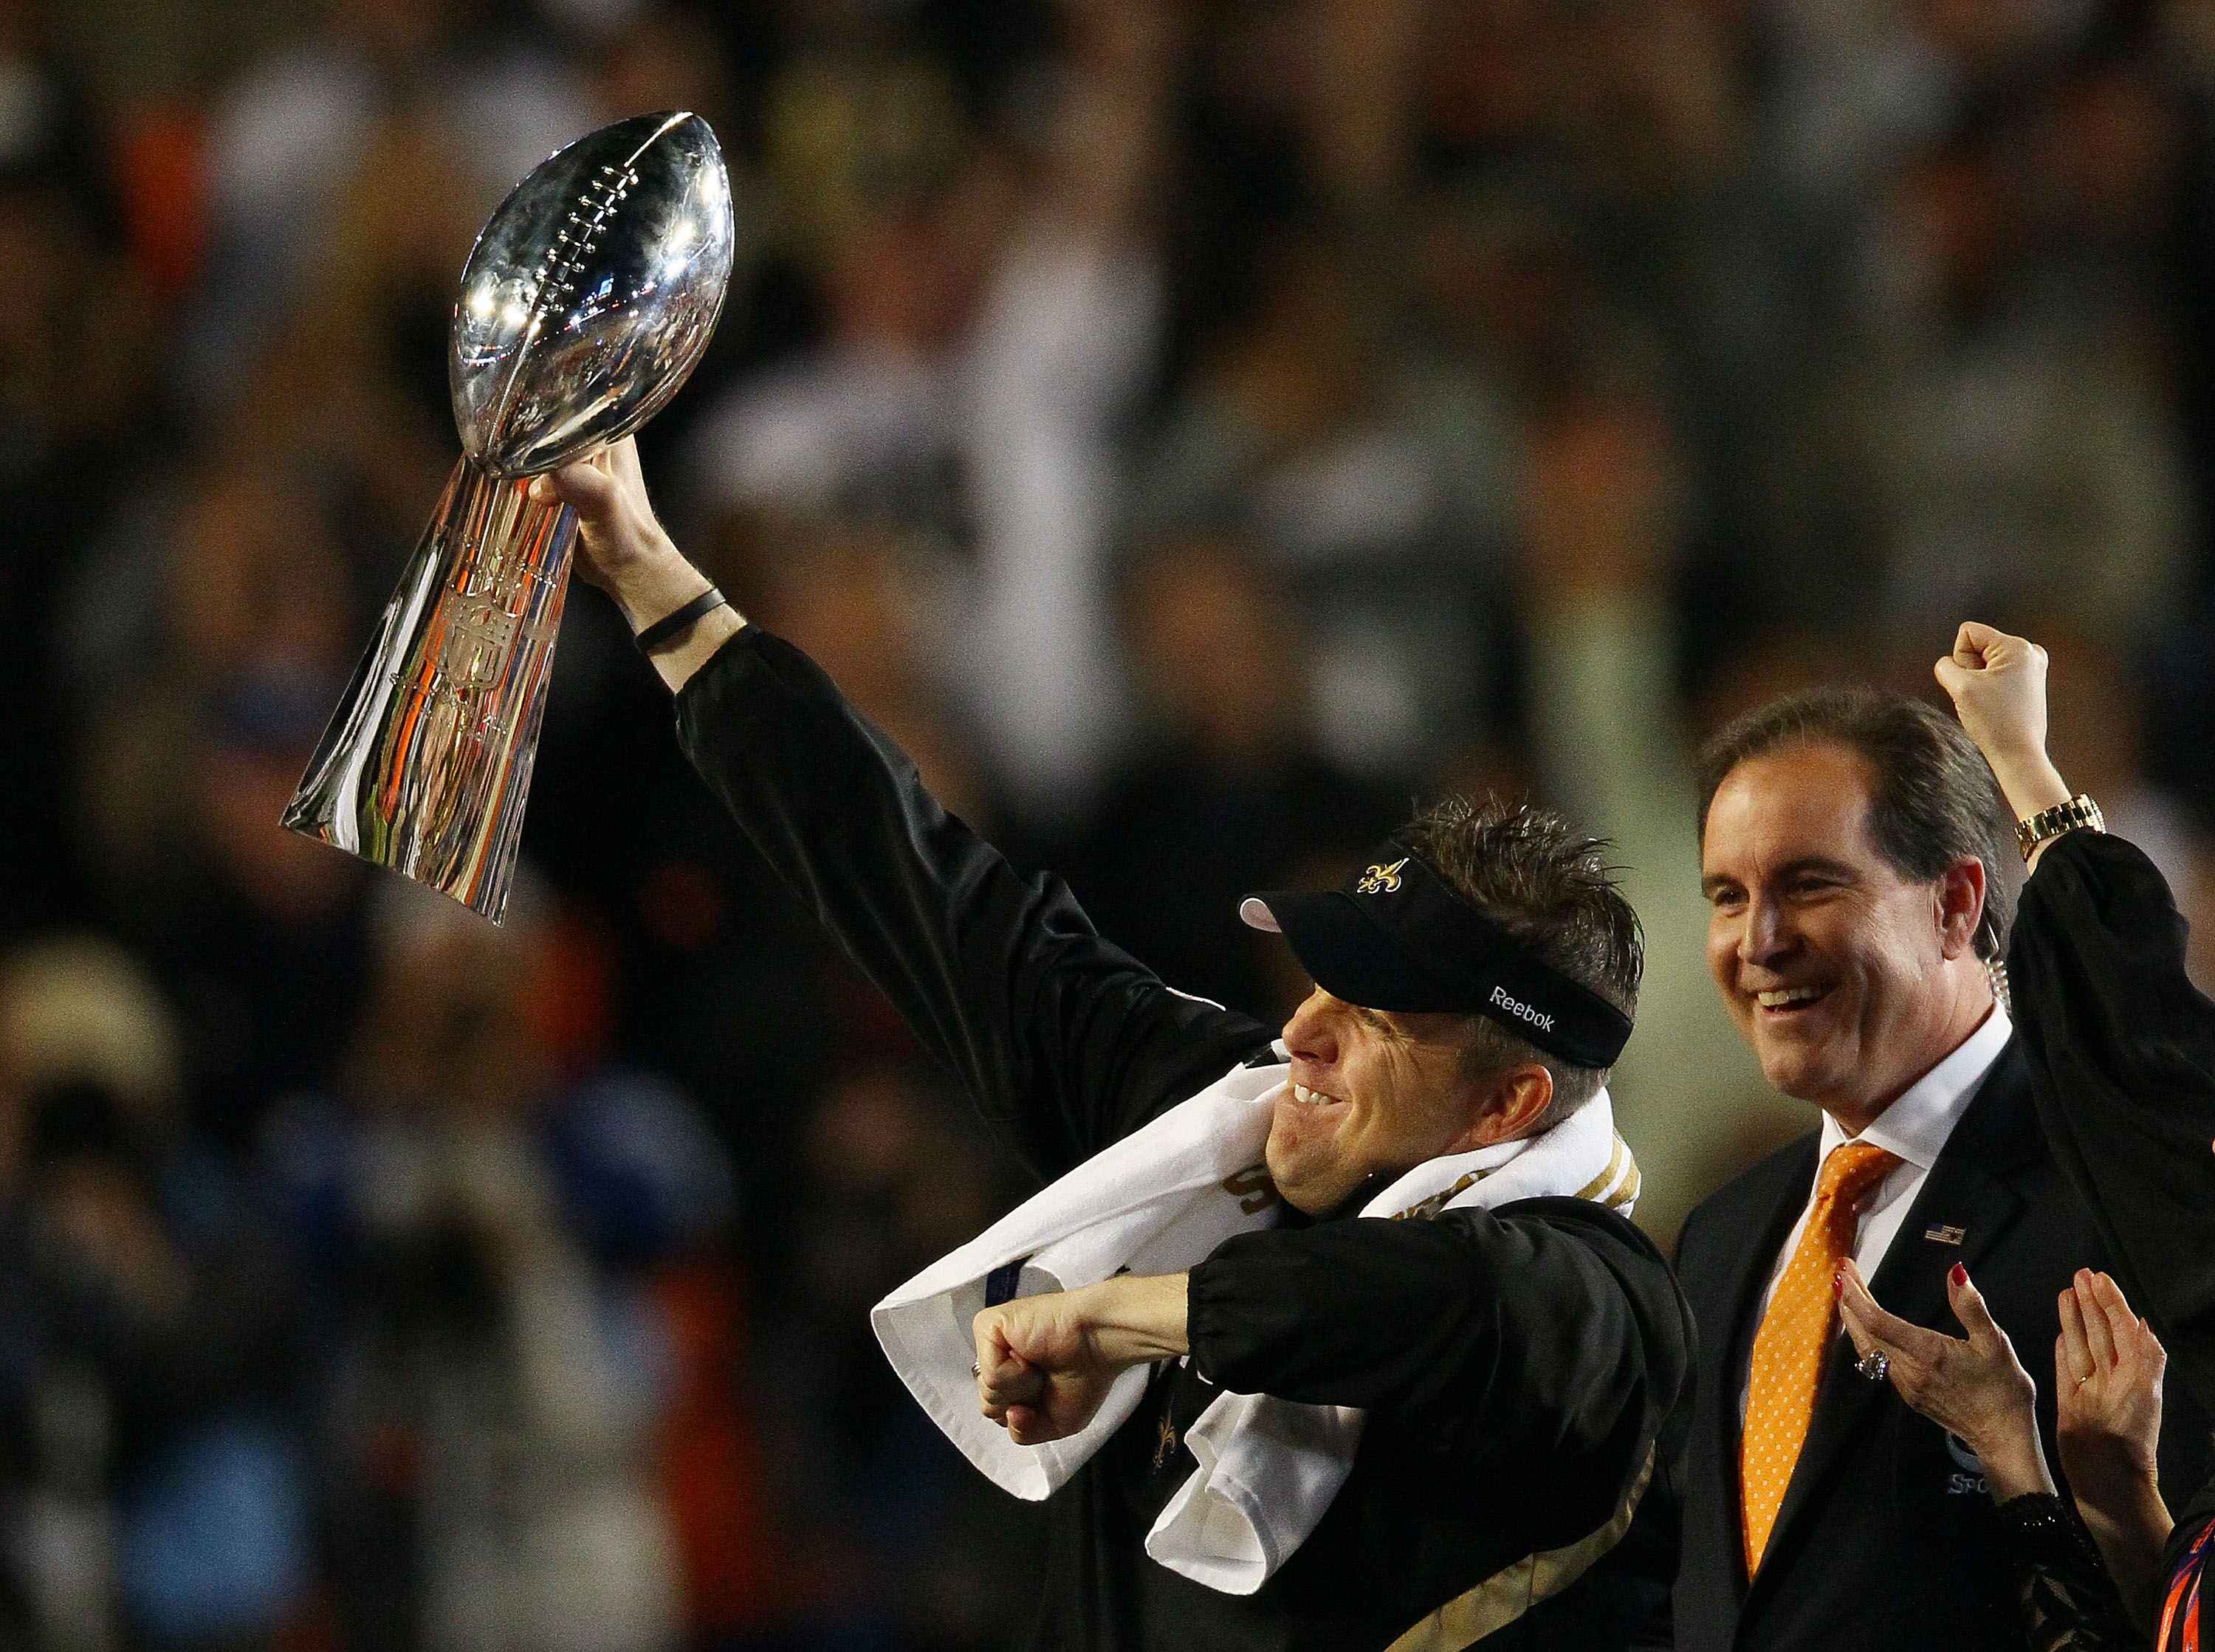 MIAMI GARDENS, FL - FEBRUARY 07: Head coach Sean Payton  of the New Orleans Saints holds up the Vince Lombardi Trophy after defeating the Indianapolis Colts during Super Bowl XLIV on February 7, 2010 at Sun Life Stadium in Miami Gardens, Florida.  (Photo